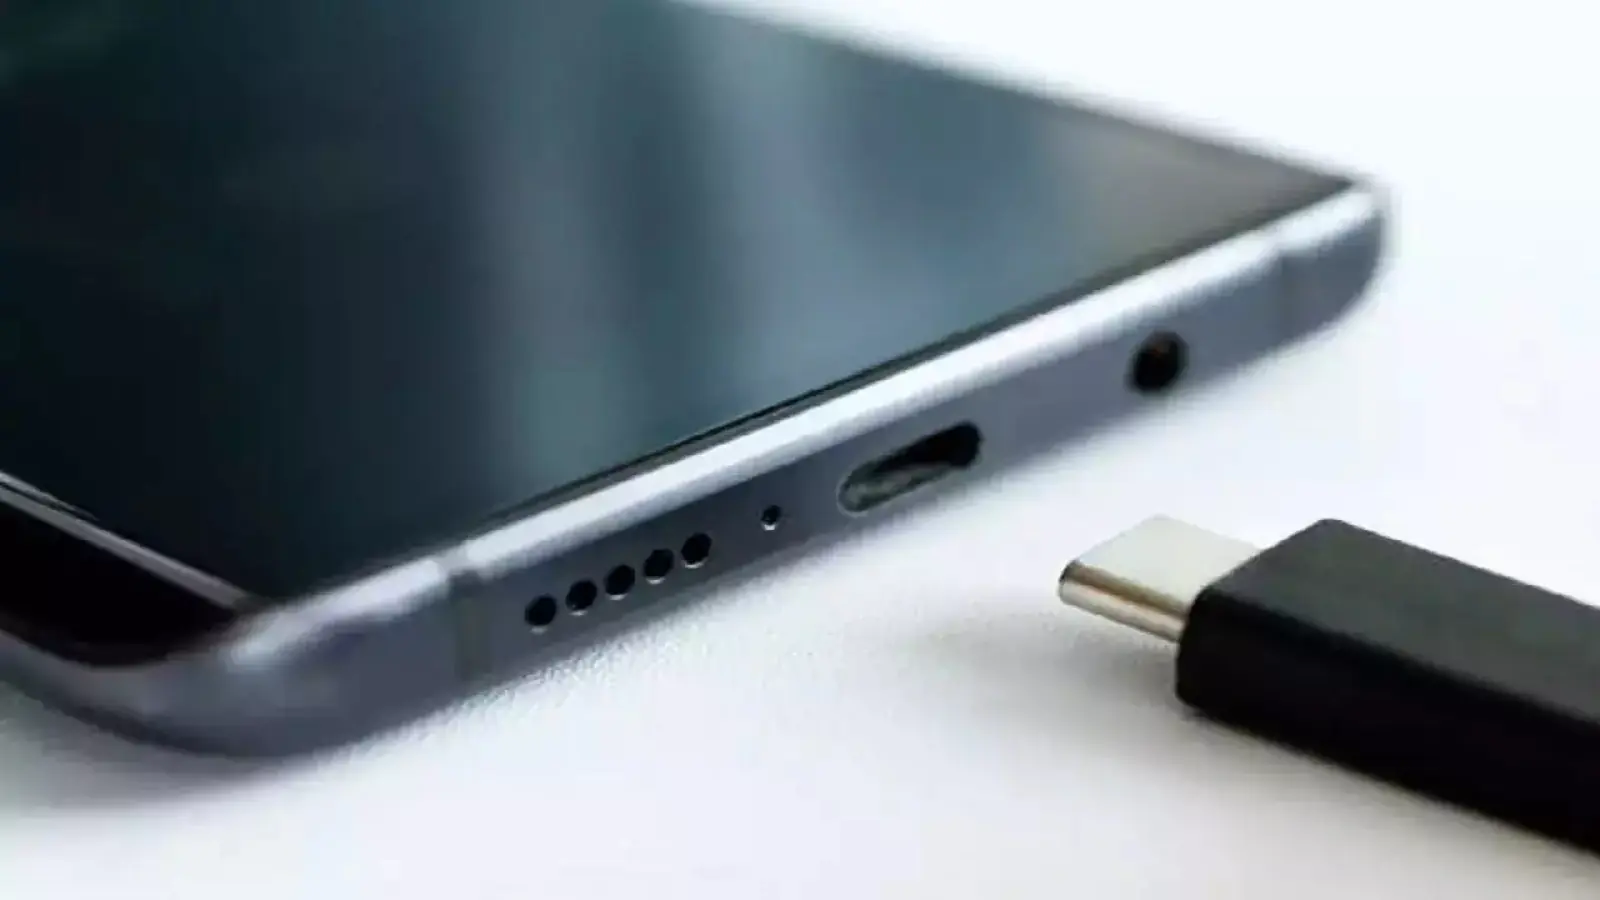 India will make USB Type C port mandatory for charging gadgets, new rules may be implemented soon